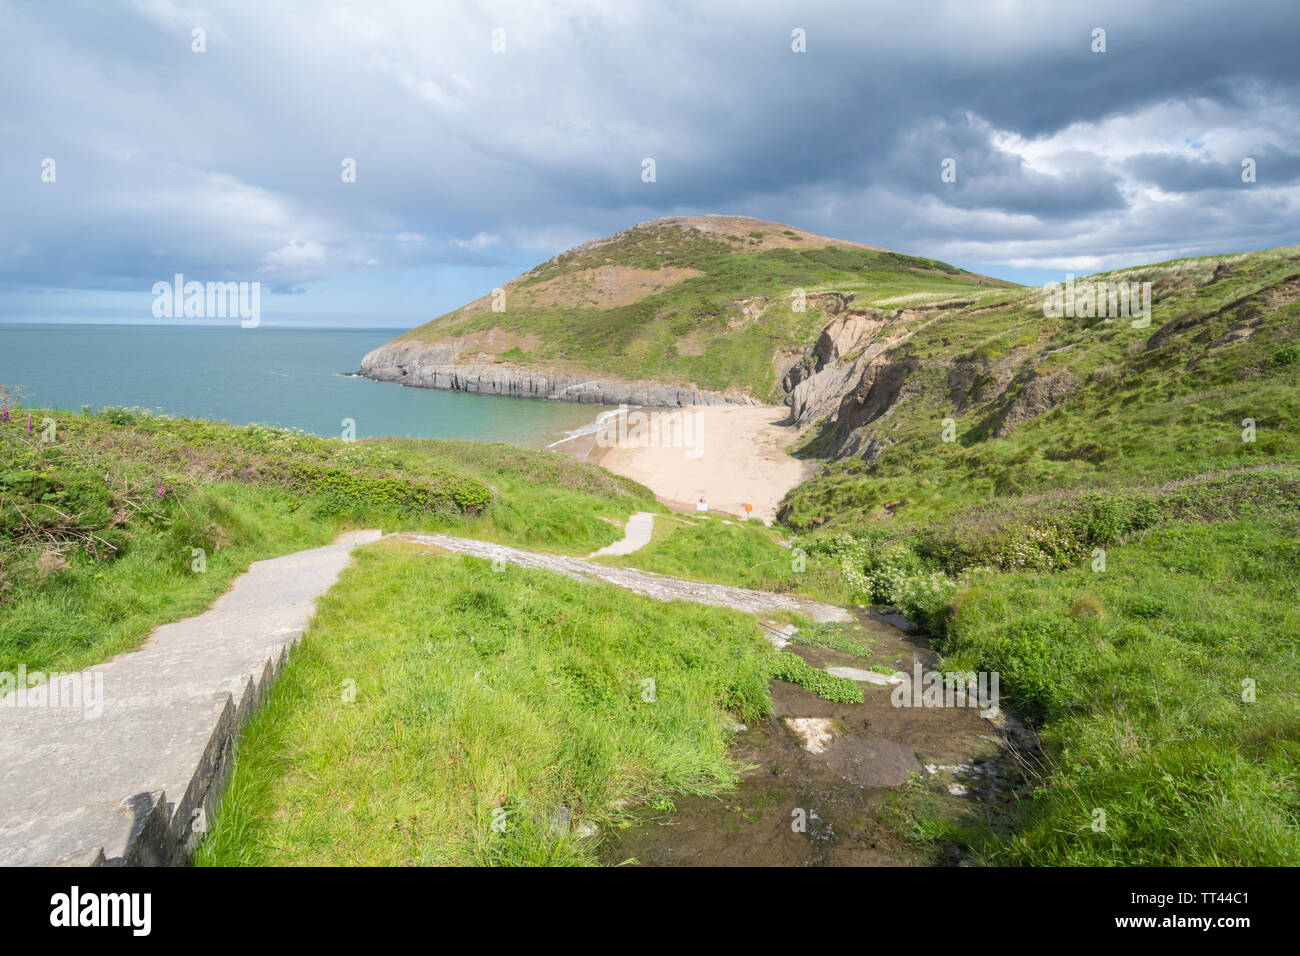 Rugged coastal scenery and beach at Mwnt Bay in Ceredigion, Wales Stock Photo